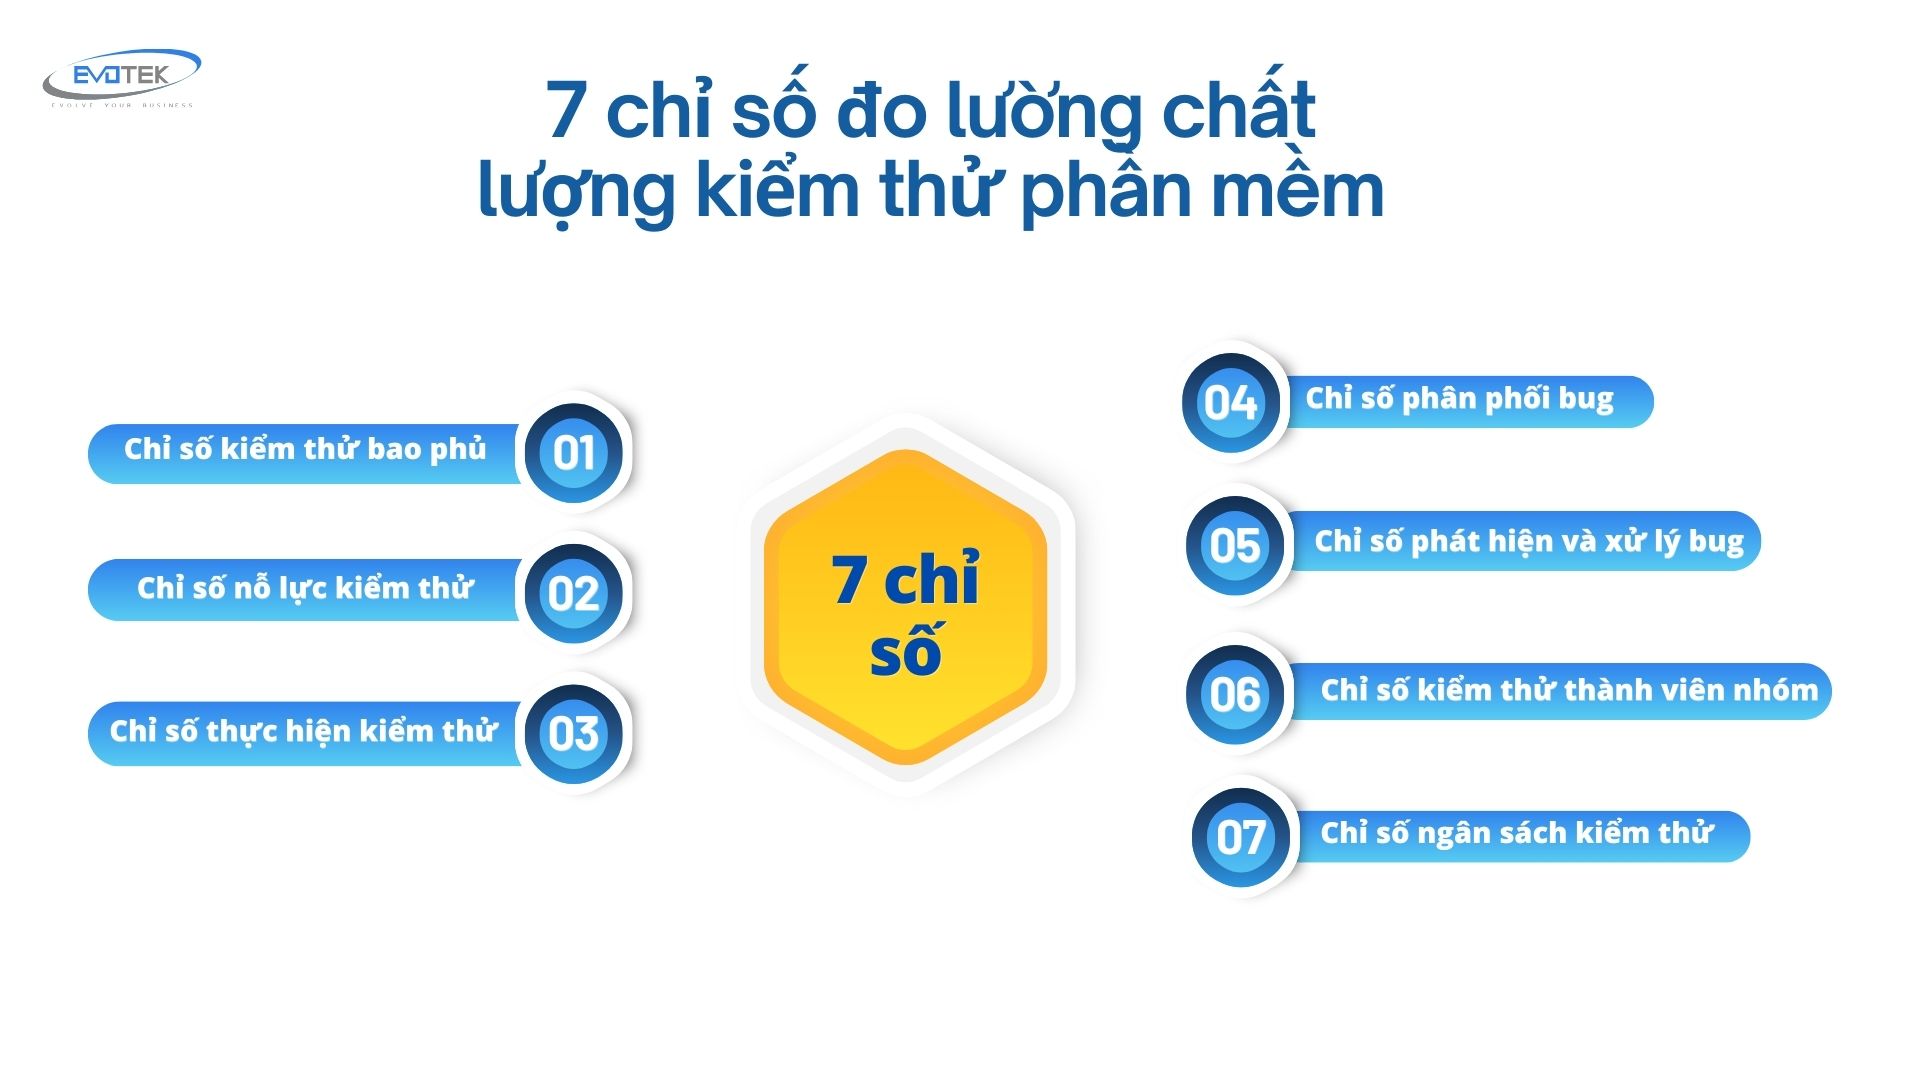 7 chi so do luong chat luong